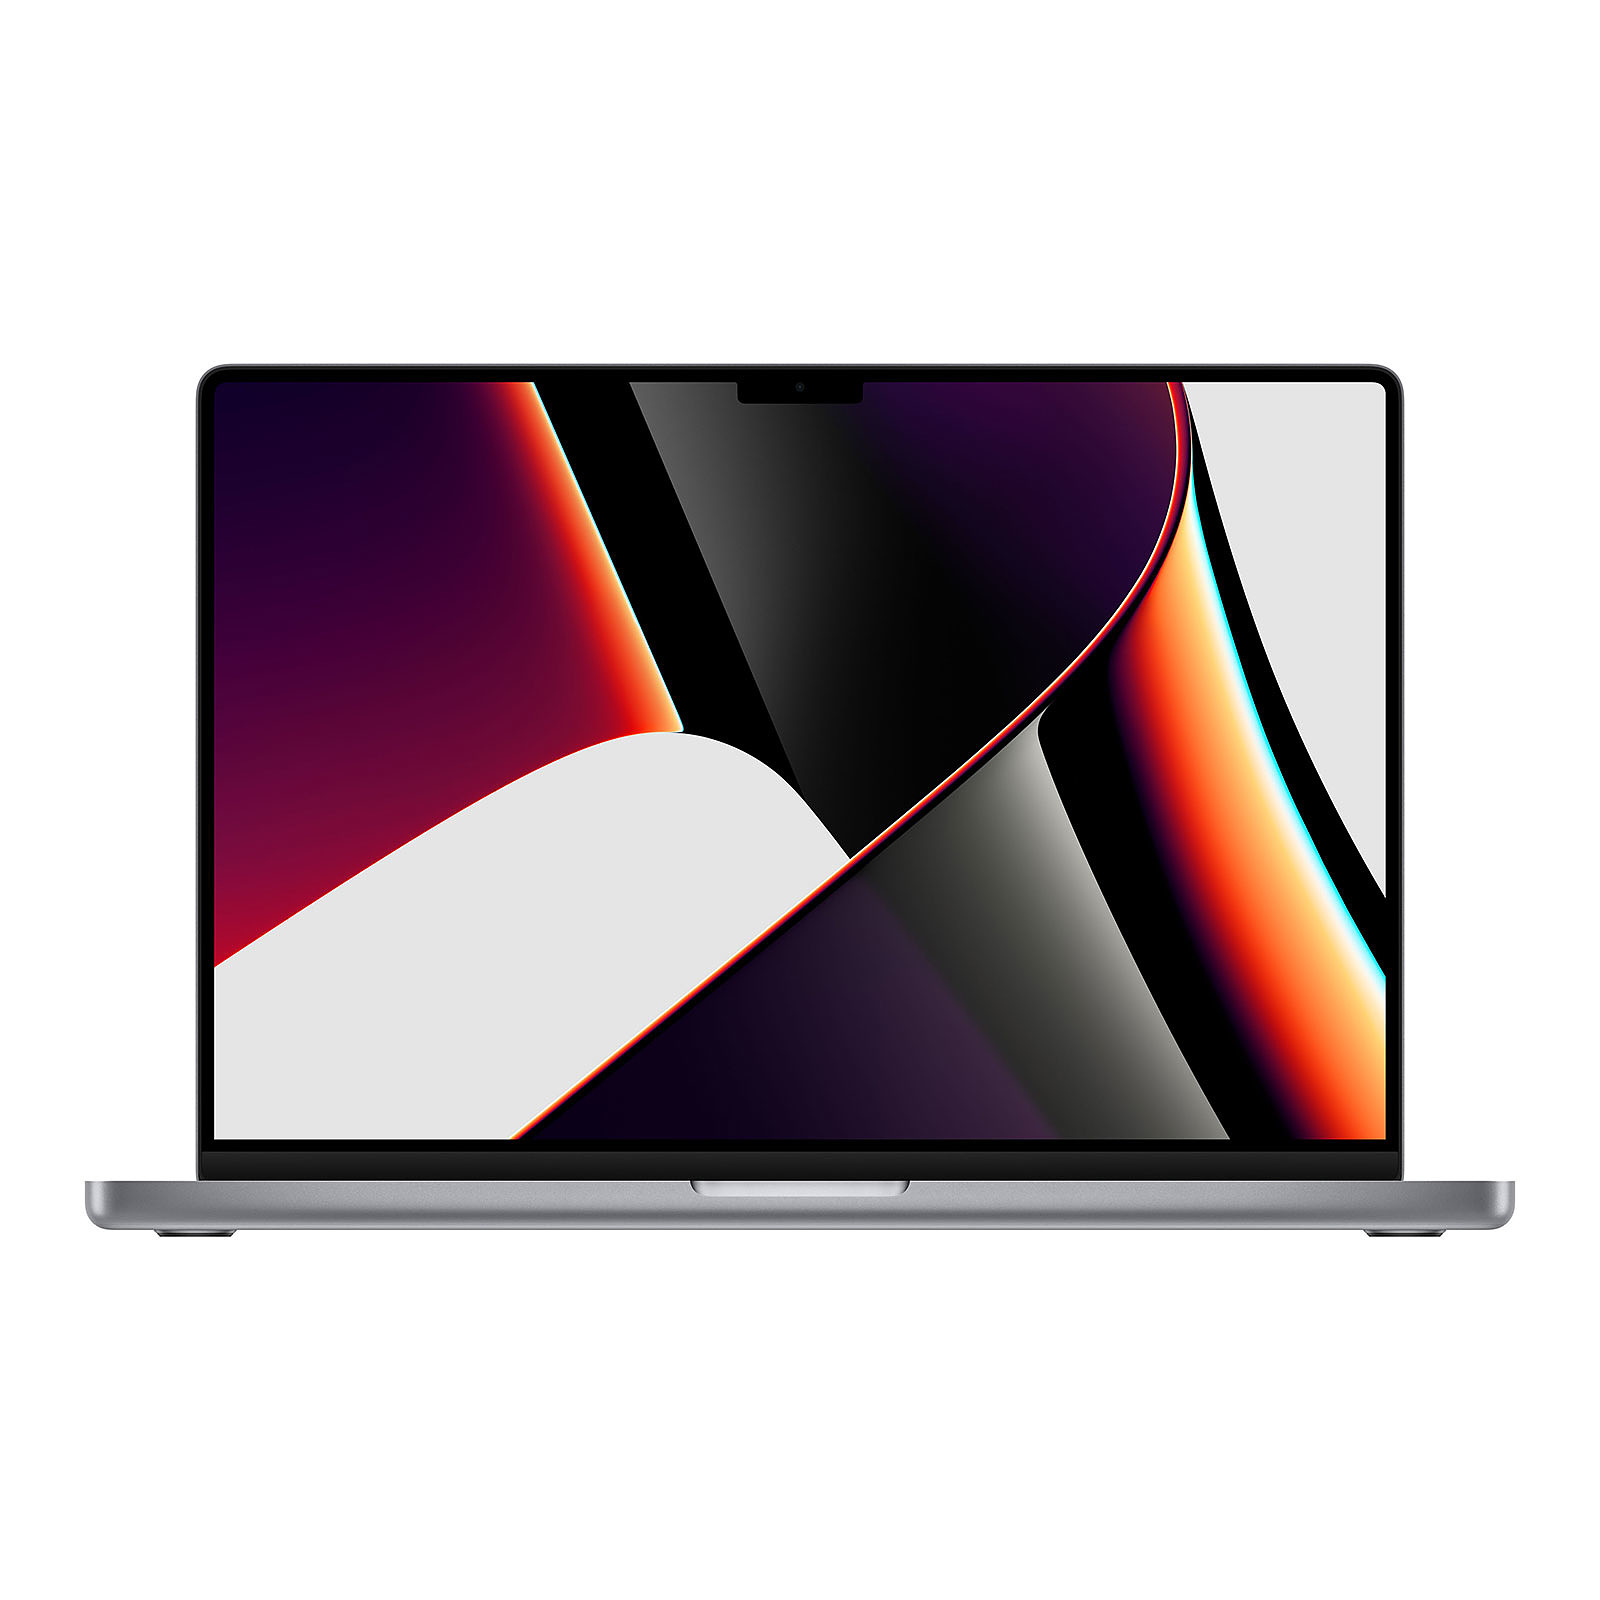 Apple MacBook Pro M1 Max (2021) 16" Gris sideral 32Go/8To (MK1A3FN/A-32GB-8TB) - MacBook Apple